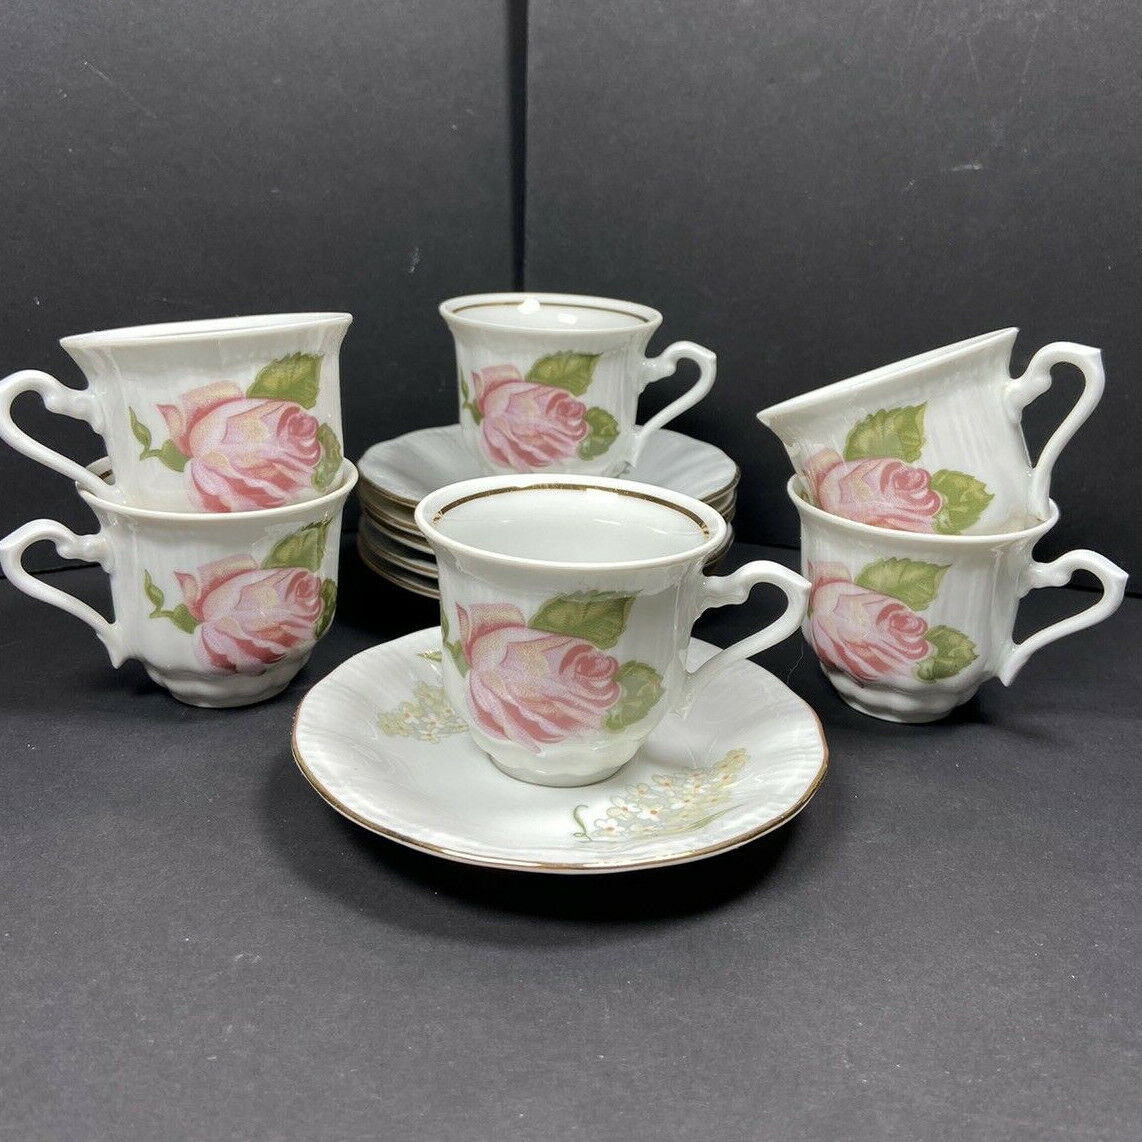 WALBRZYCH China Briar Rose (WLB35) 12pc Demitasse Cup & Saucer Set from Poland